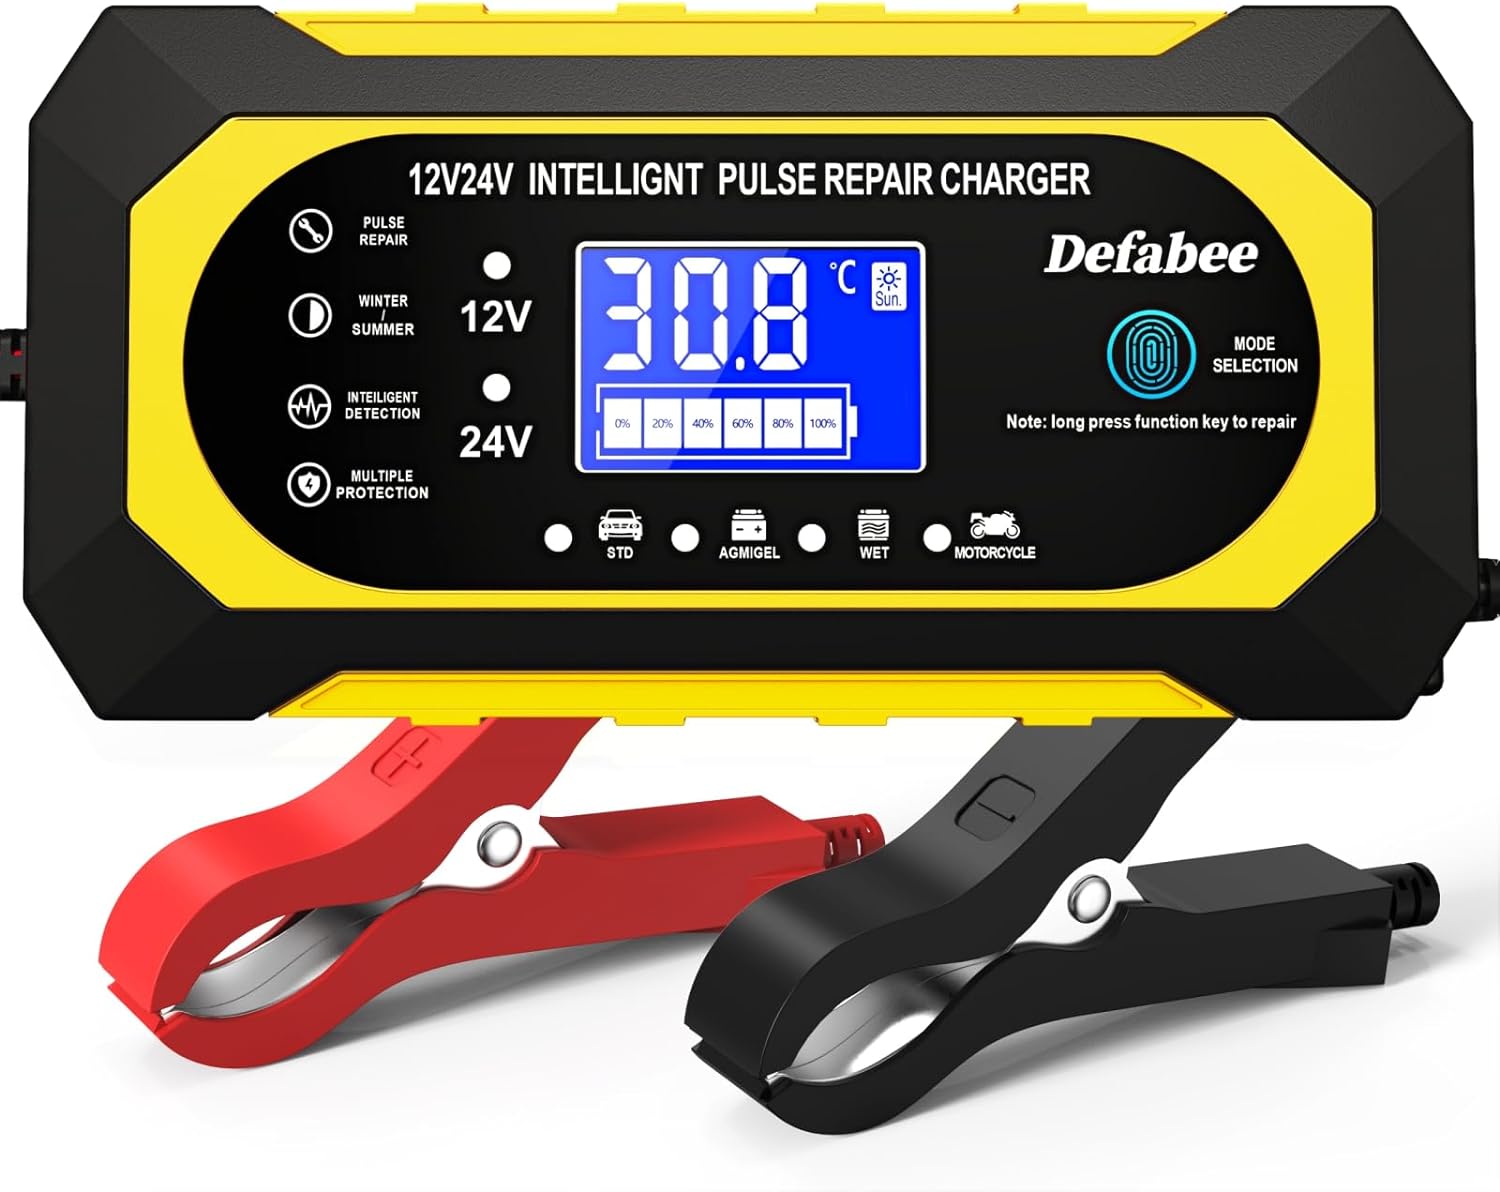 Defabee Car Battery Charger Review